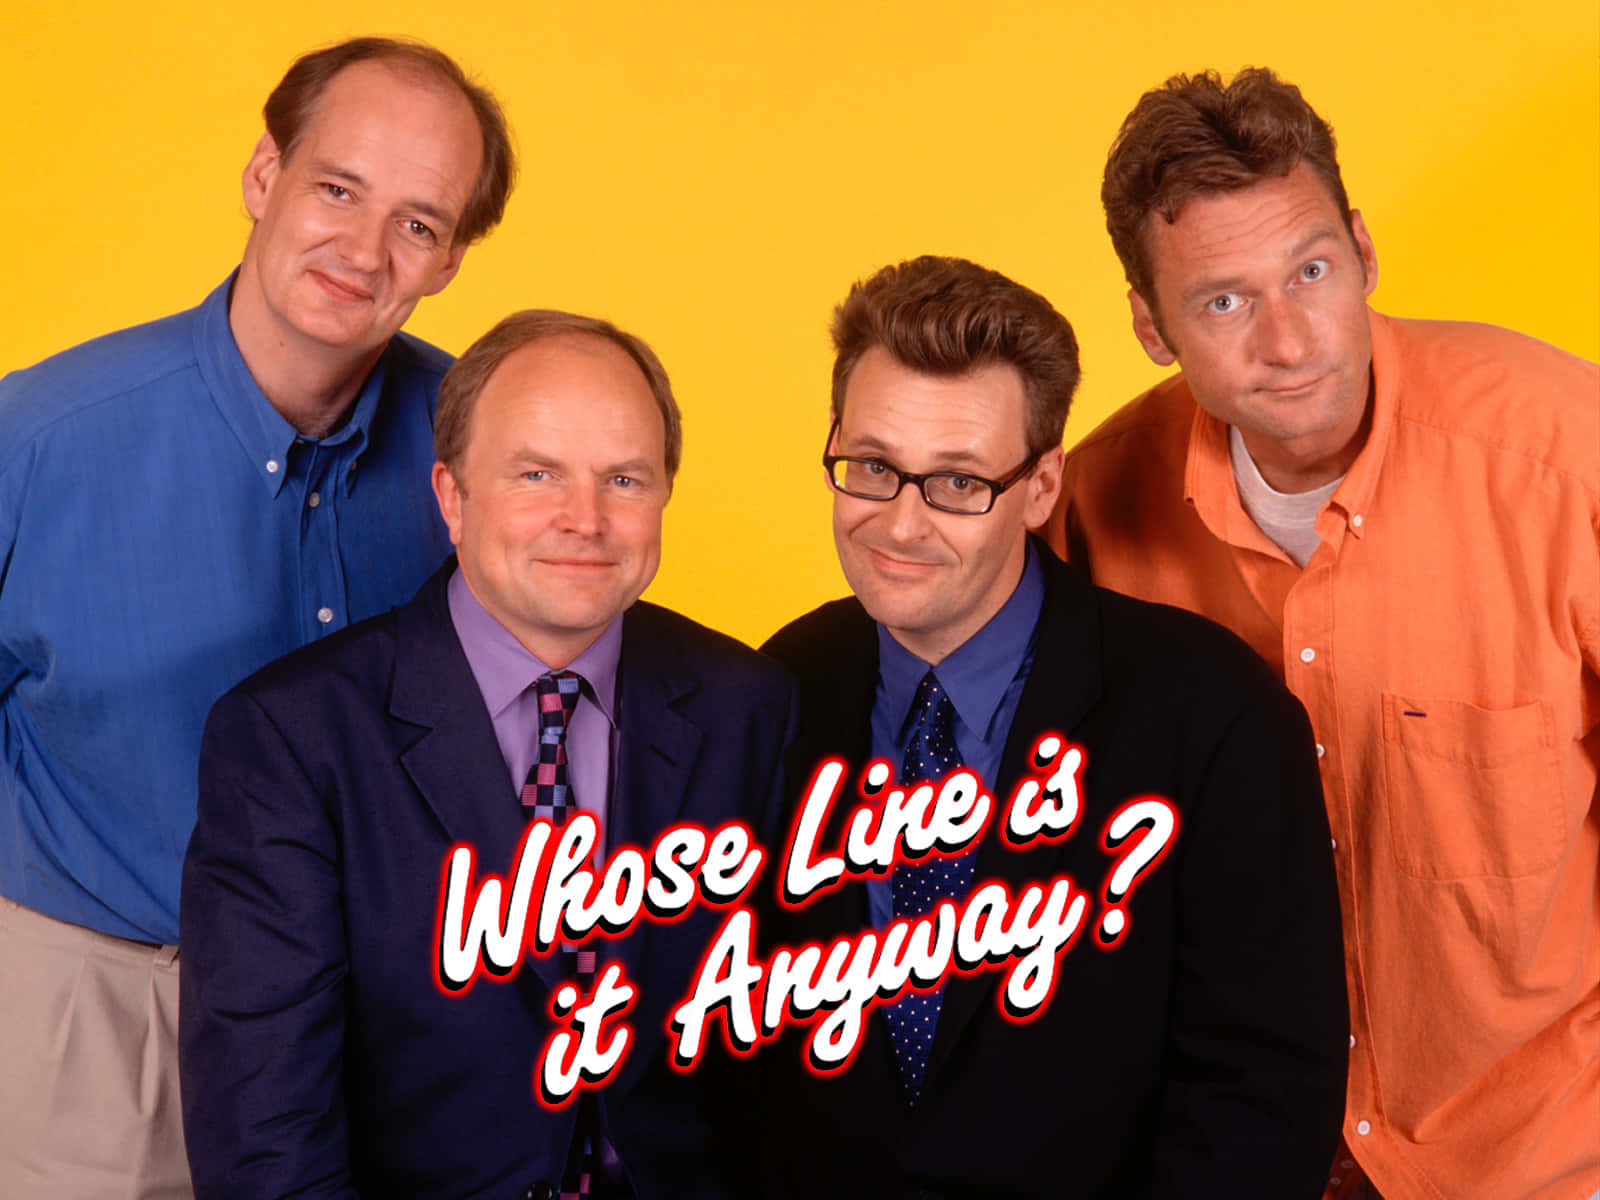 Ryan Stiles Whose Line Is It Anyway computer tapet: Wallpaper